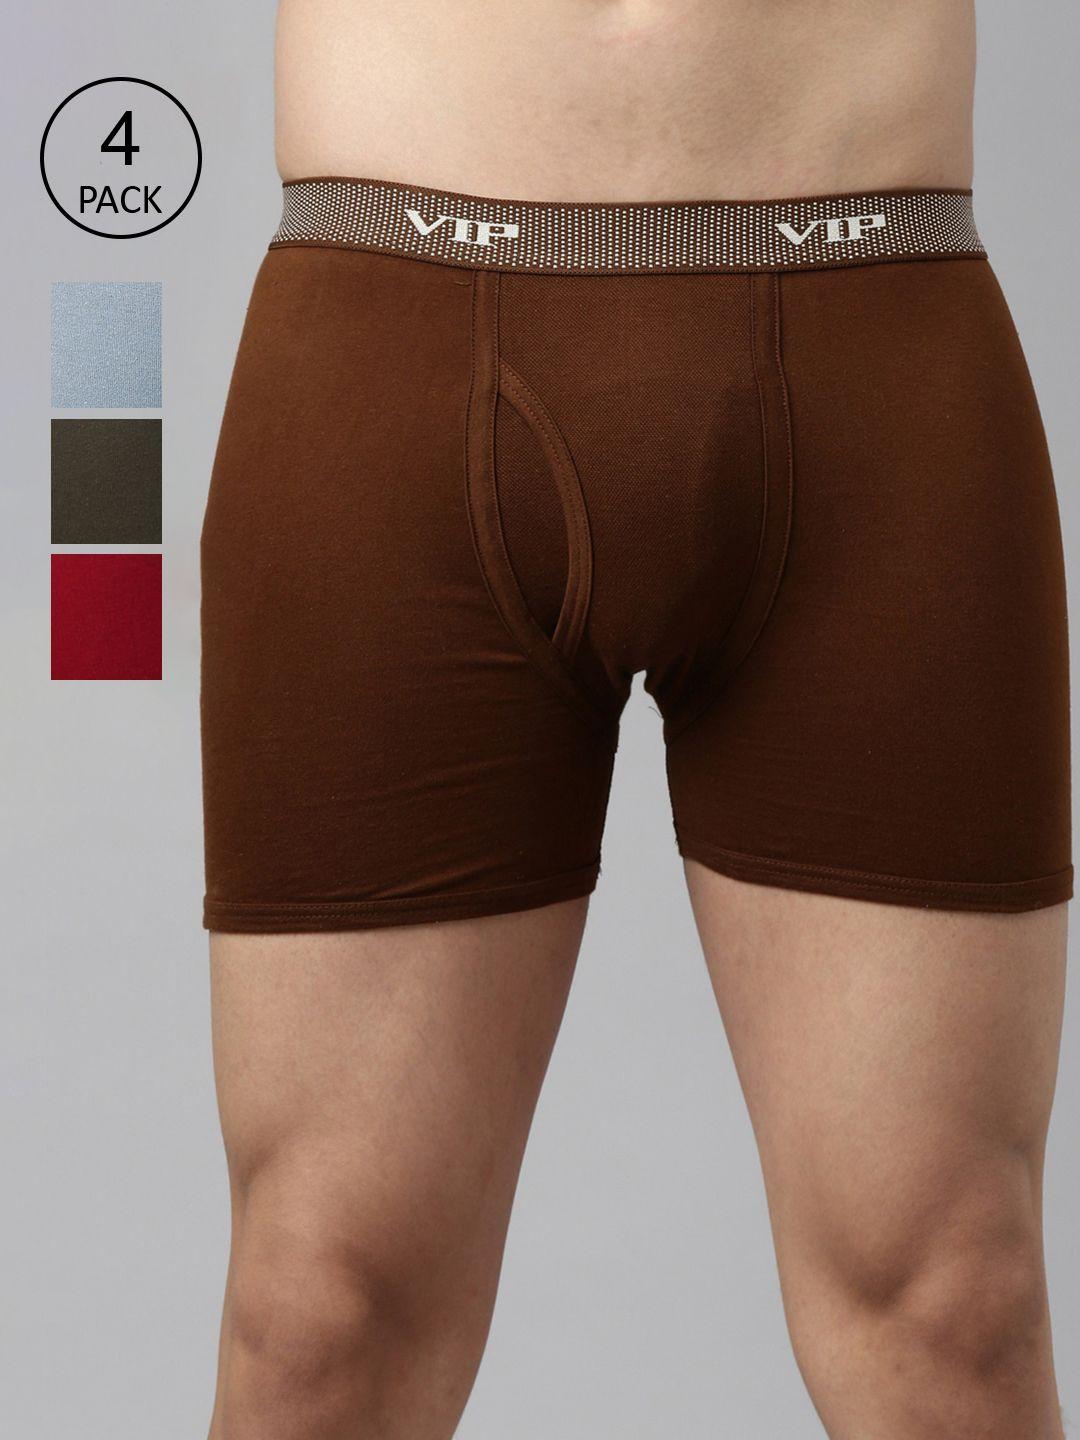 vip men pack of 4 assorted solid pure cotton trunks freshtpo4_80